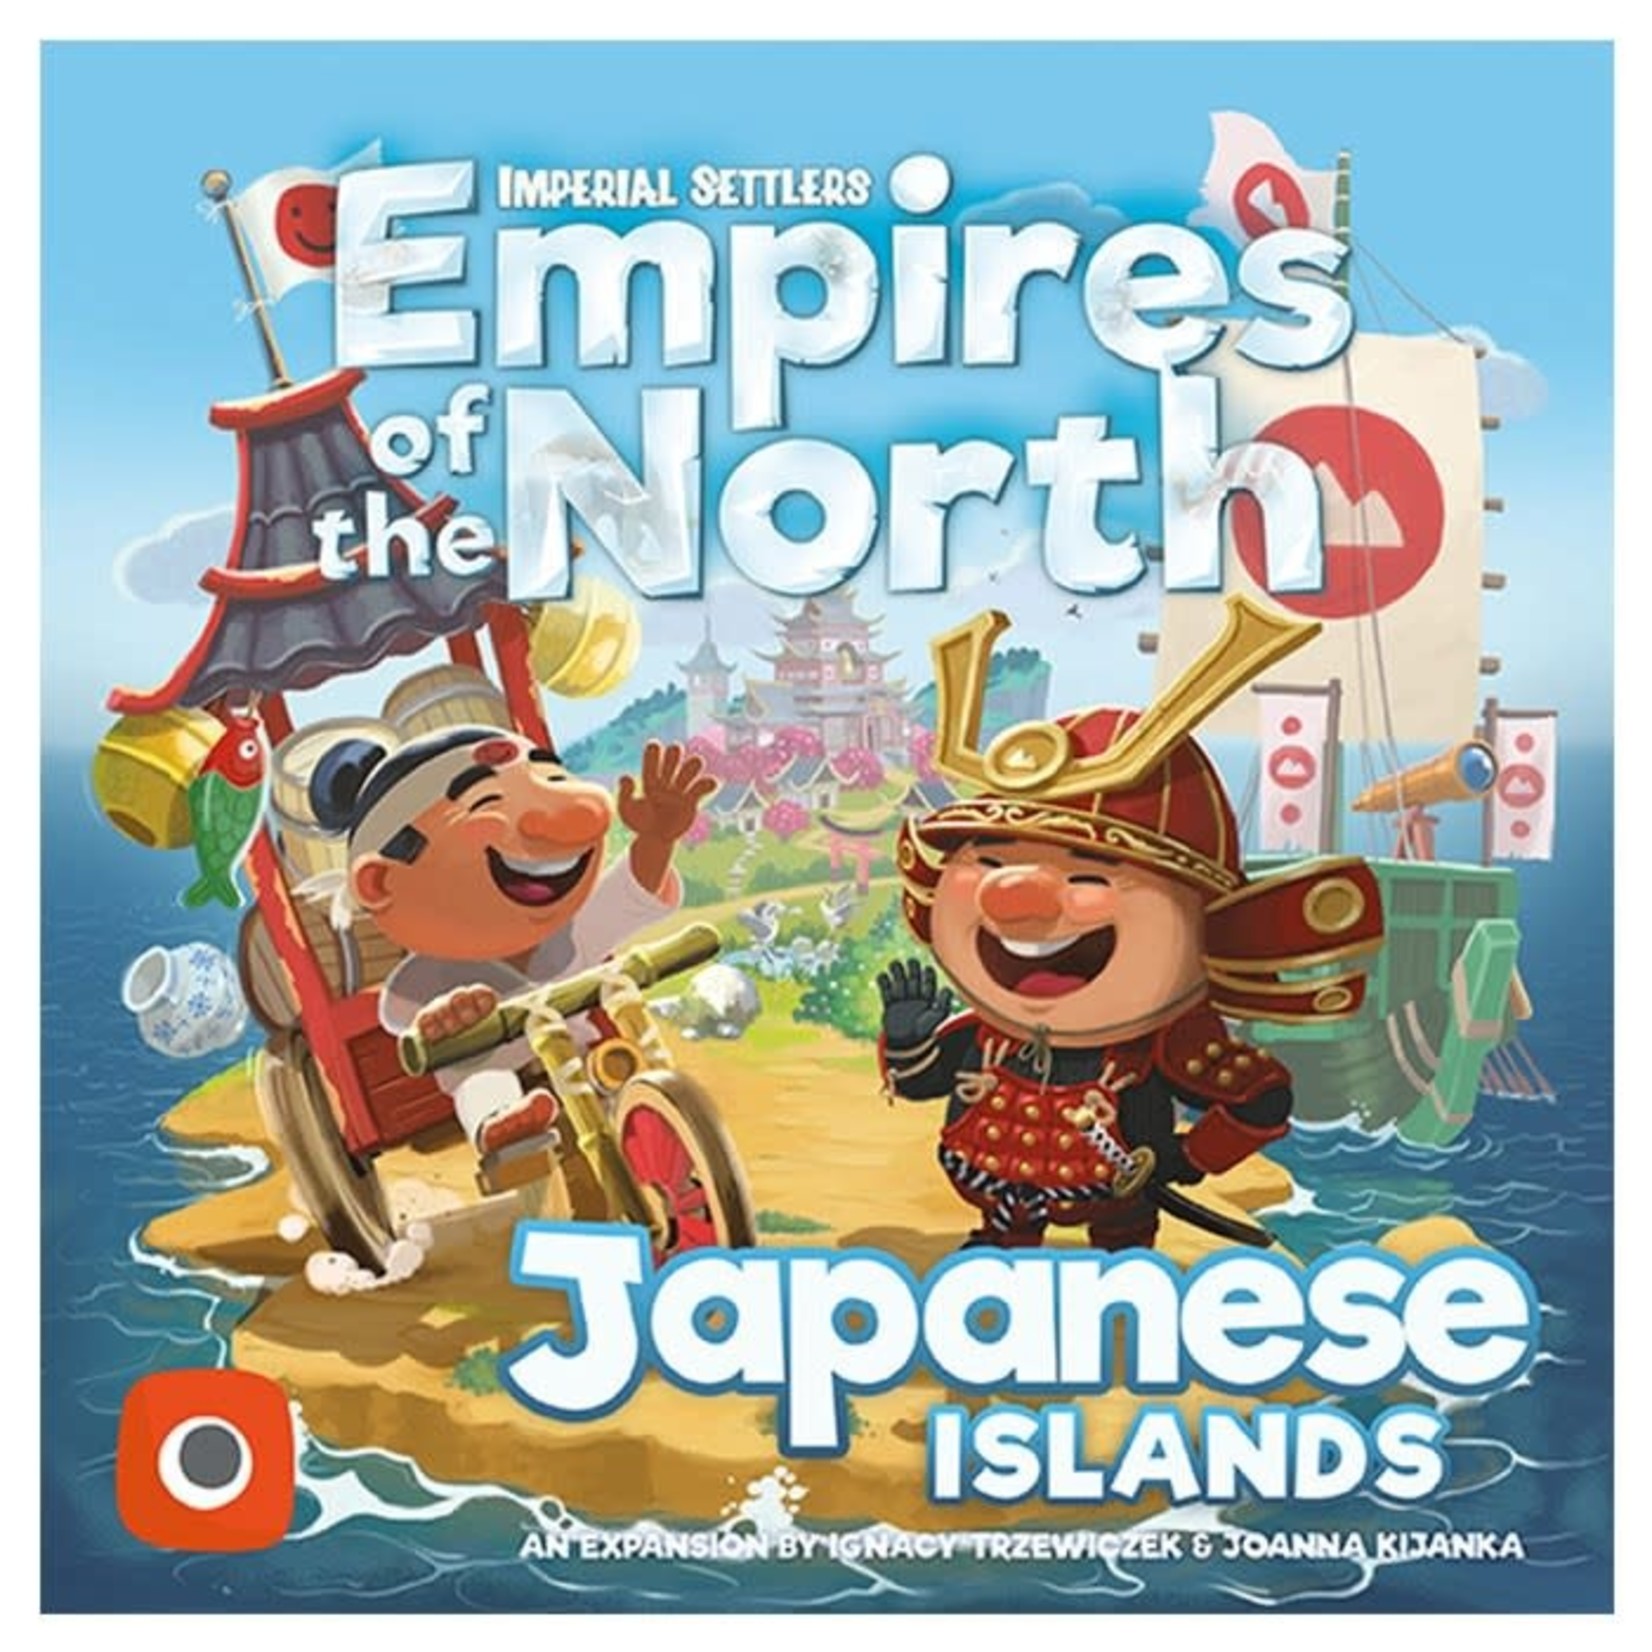 Portal Games Imperial Settlers Empires of the North Japanese Islands